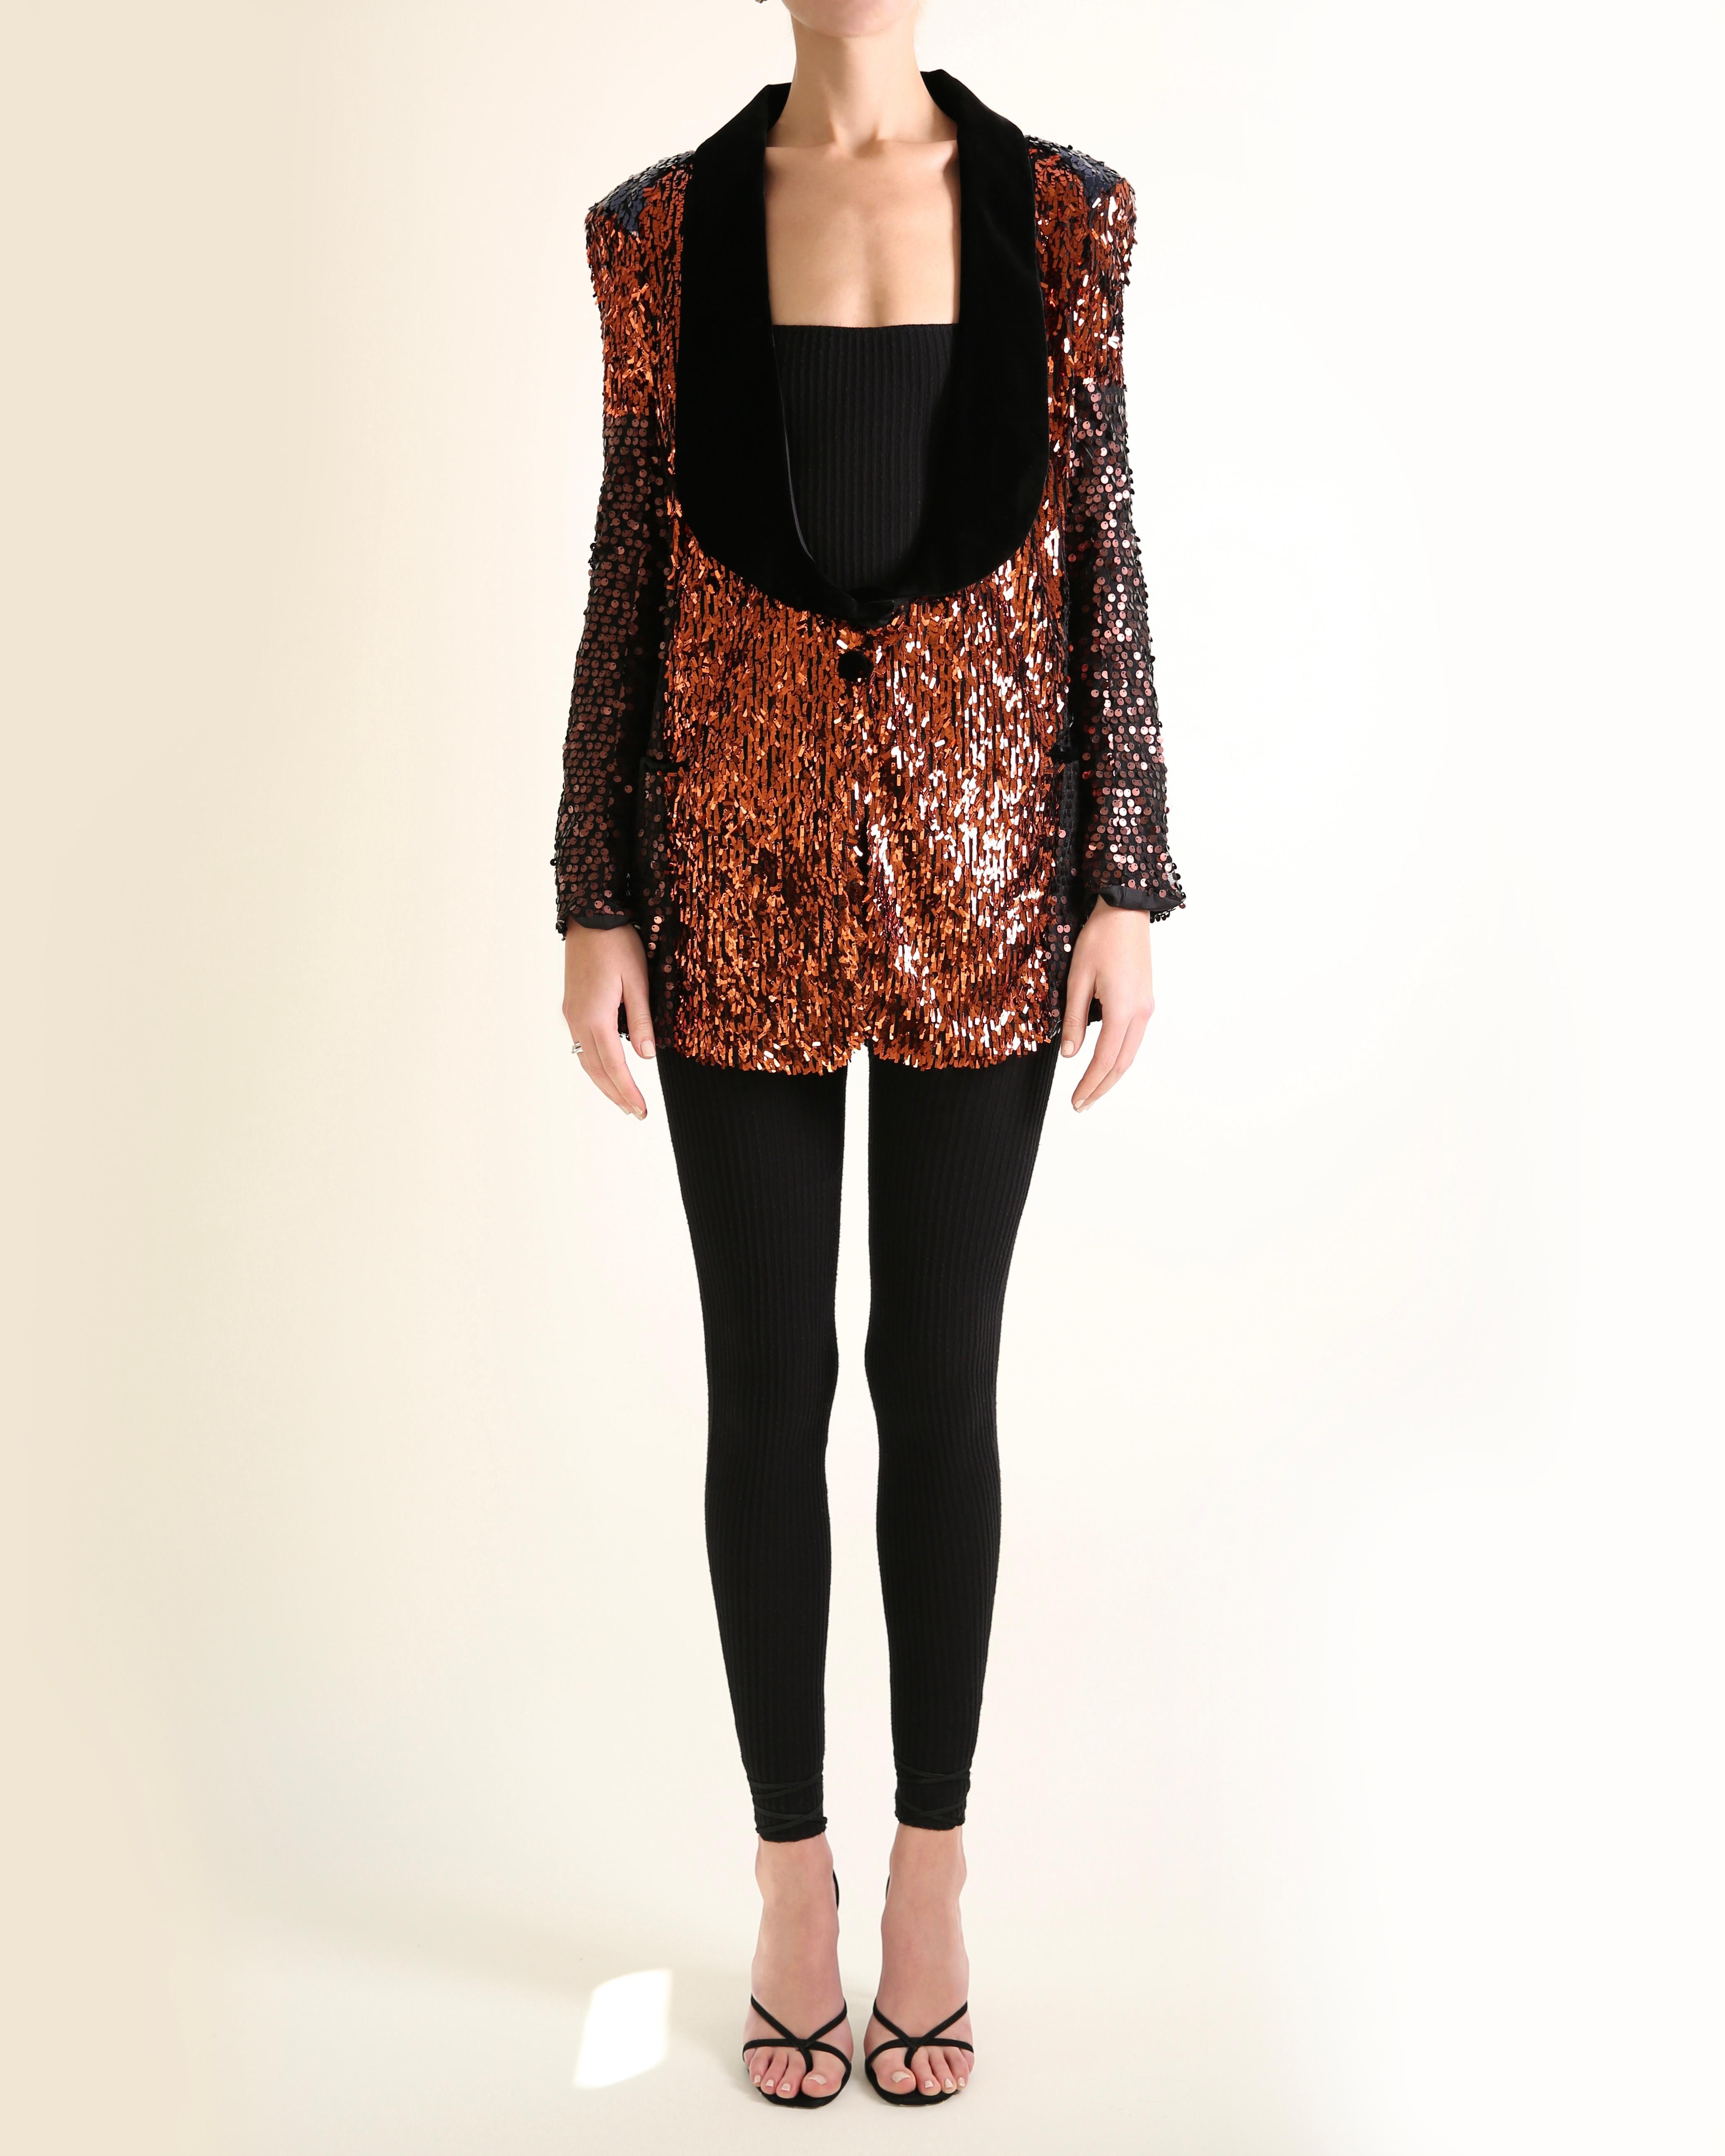 Sonia Rykiel Fall 2009 sequin blazer jacket
Oversized fit
Black mesh covered in color block panels of bronze and blue sequins
Black velvet collar and mock pockets 
Shoulder pads
Single button closure 

Composition:
100% Polyester

Size:
FR 36

In